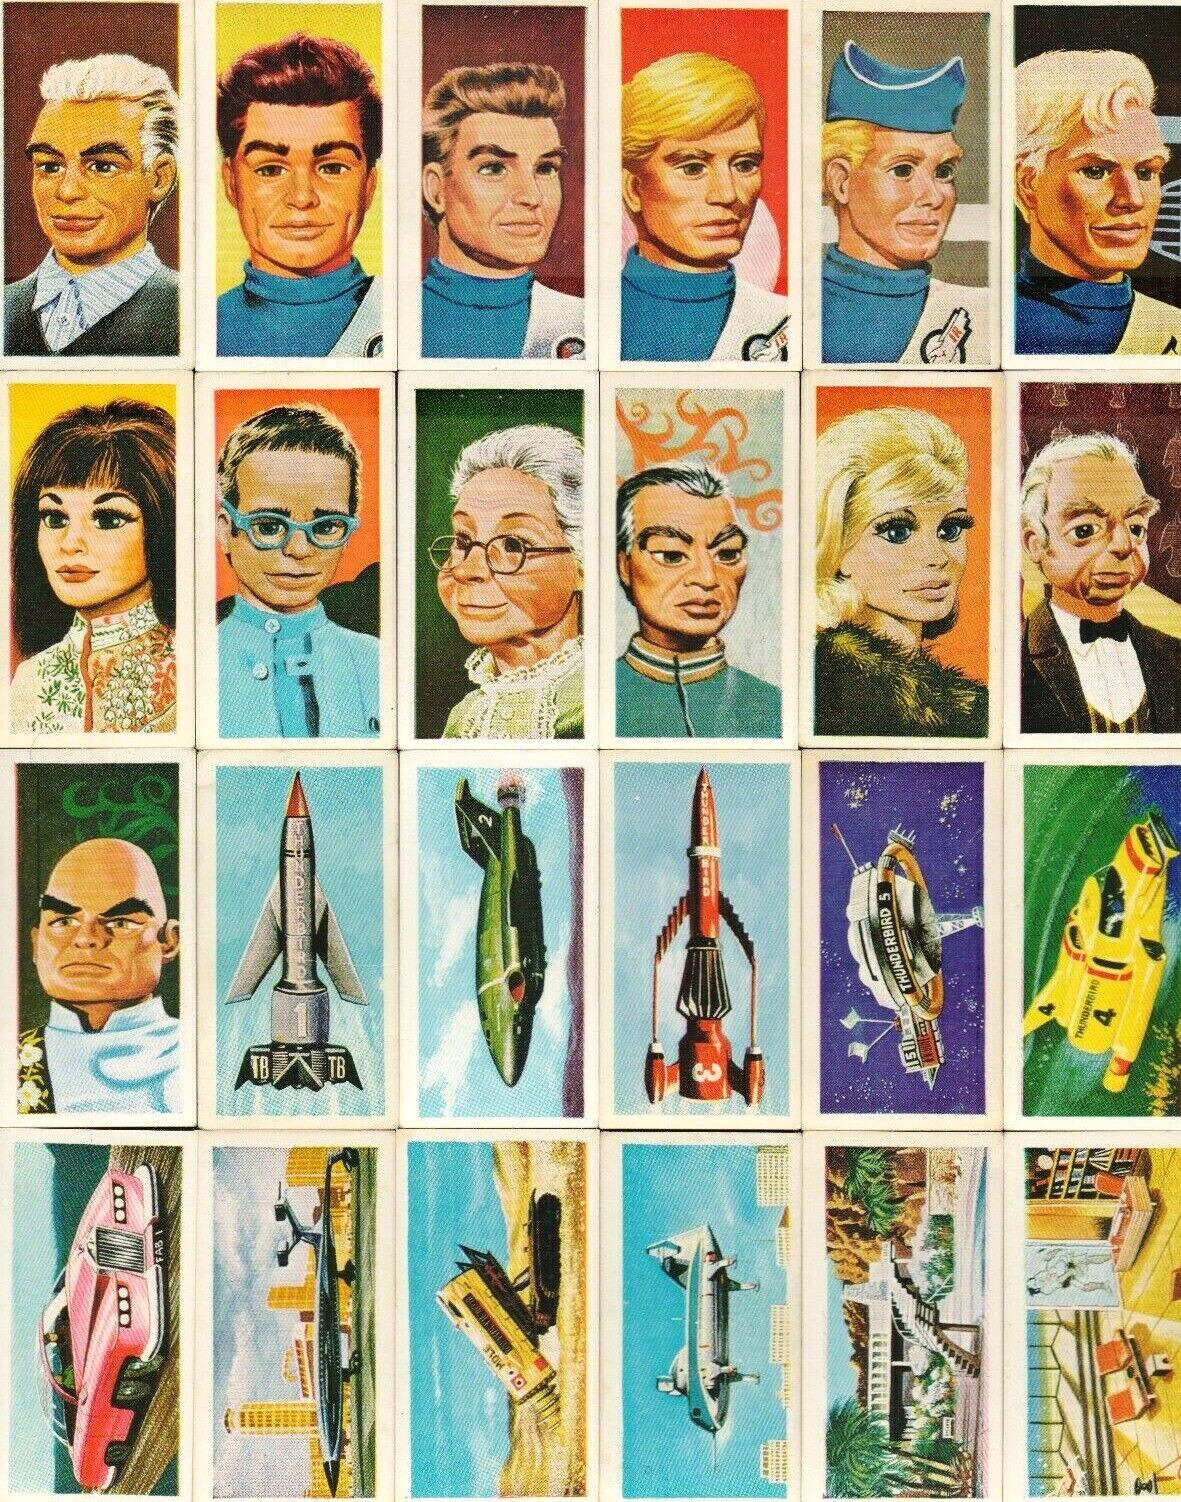 1967 BARRATT GERRY ANDERSON THUNDERBIRDS SERIES 1 SET OF 50 CONFECTIONERY CARDS